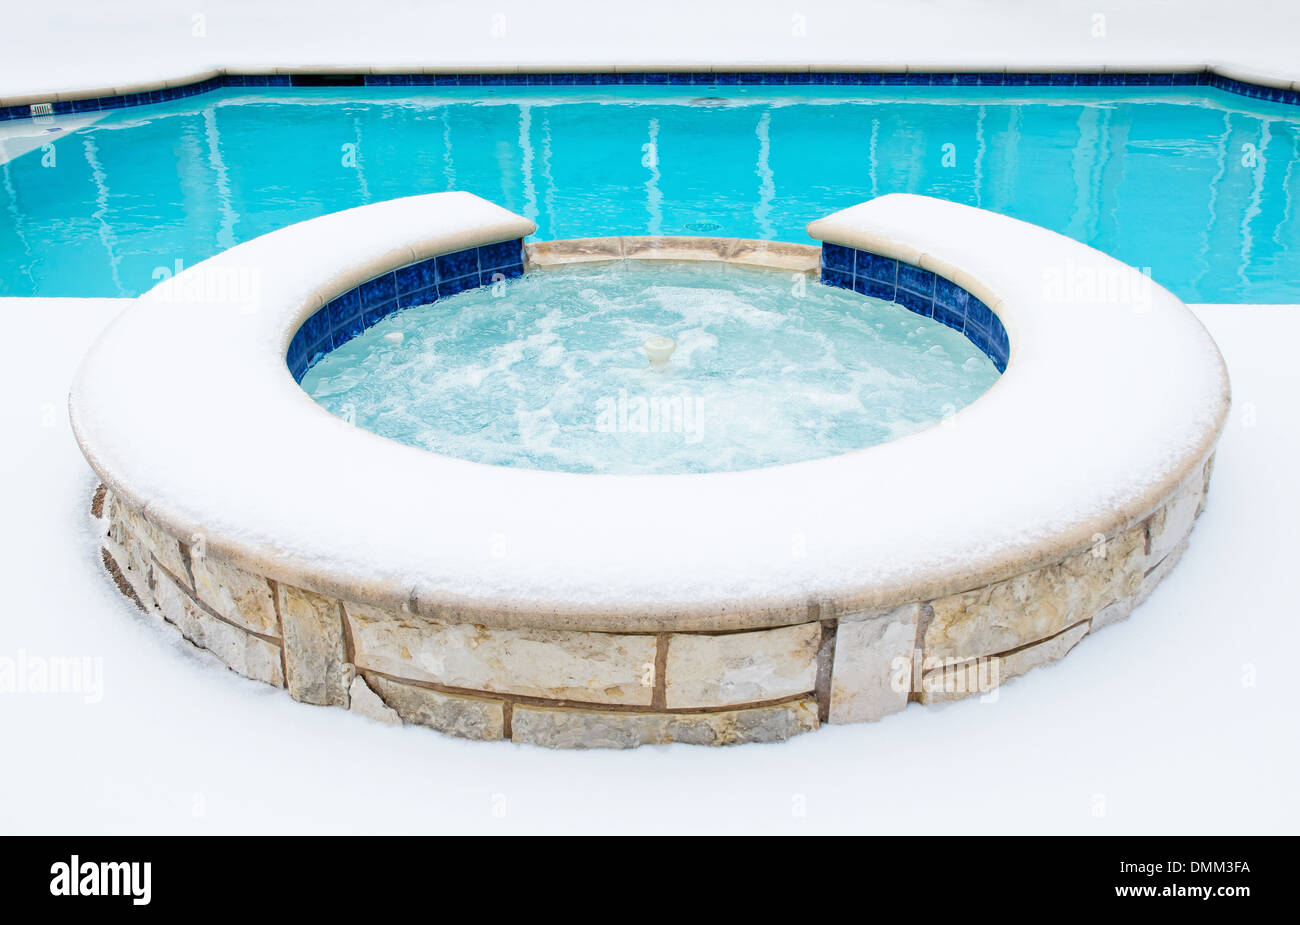 Outdoor residential hot tub or spa by swimming pool surrounded by snow in the winter Stock Photo